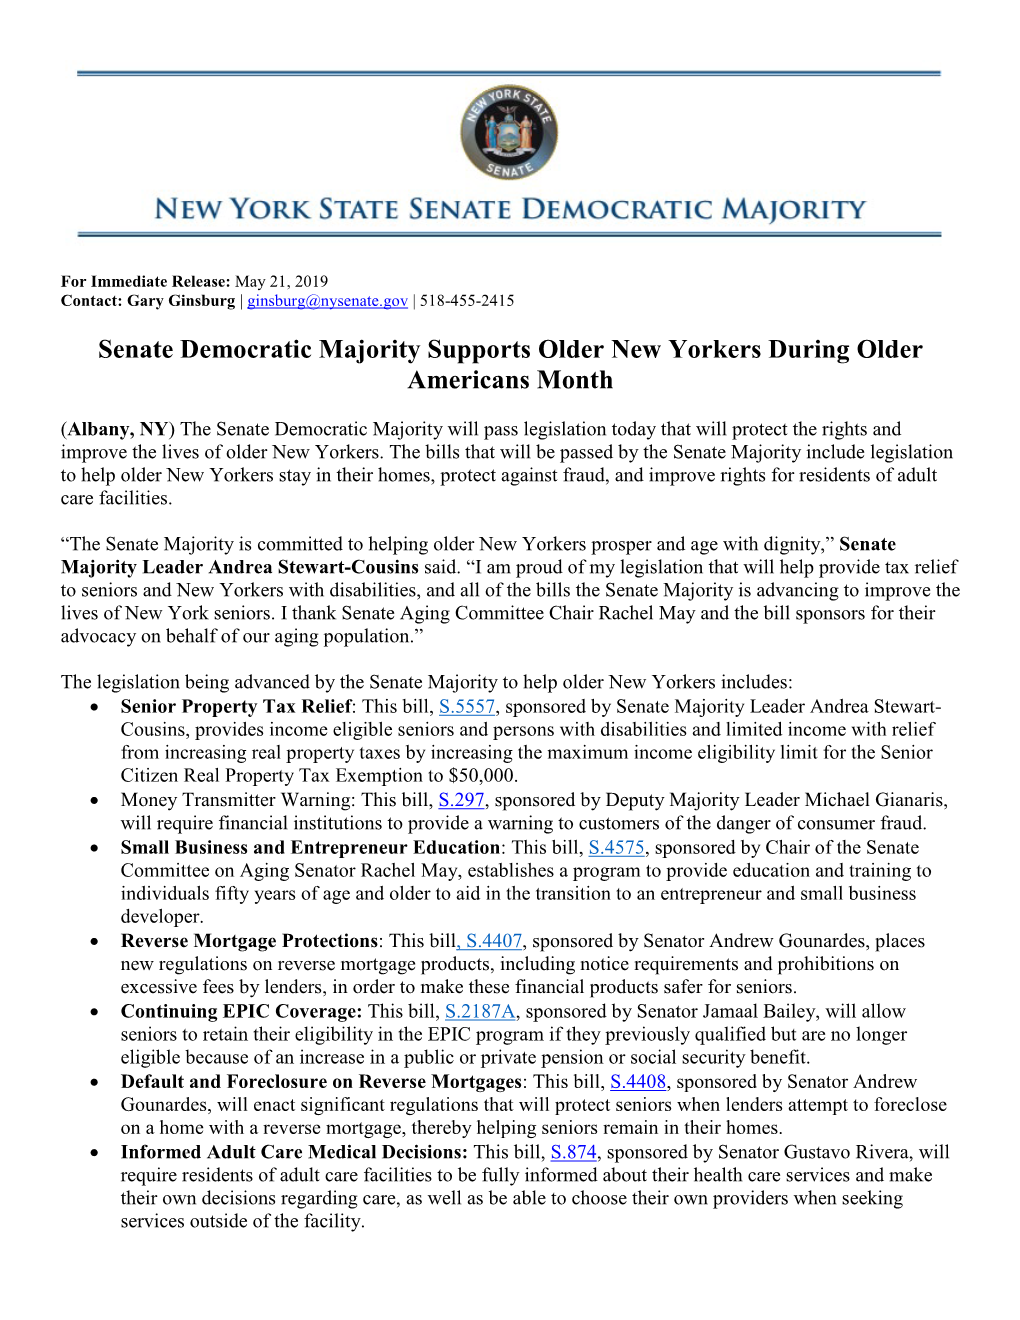 Senate Democratic Majority Supports Older New Yorkers During Older Americans Month